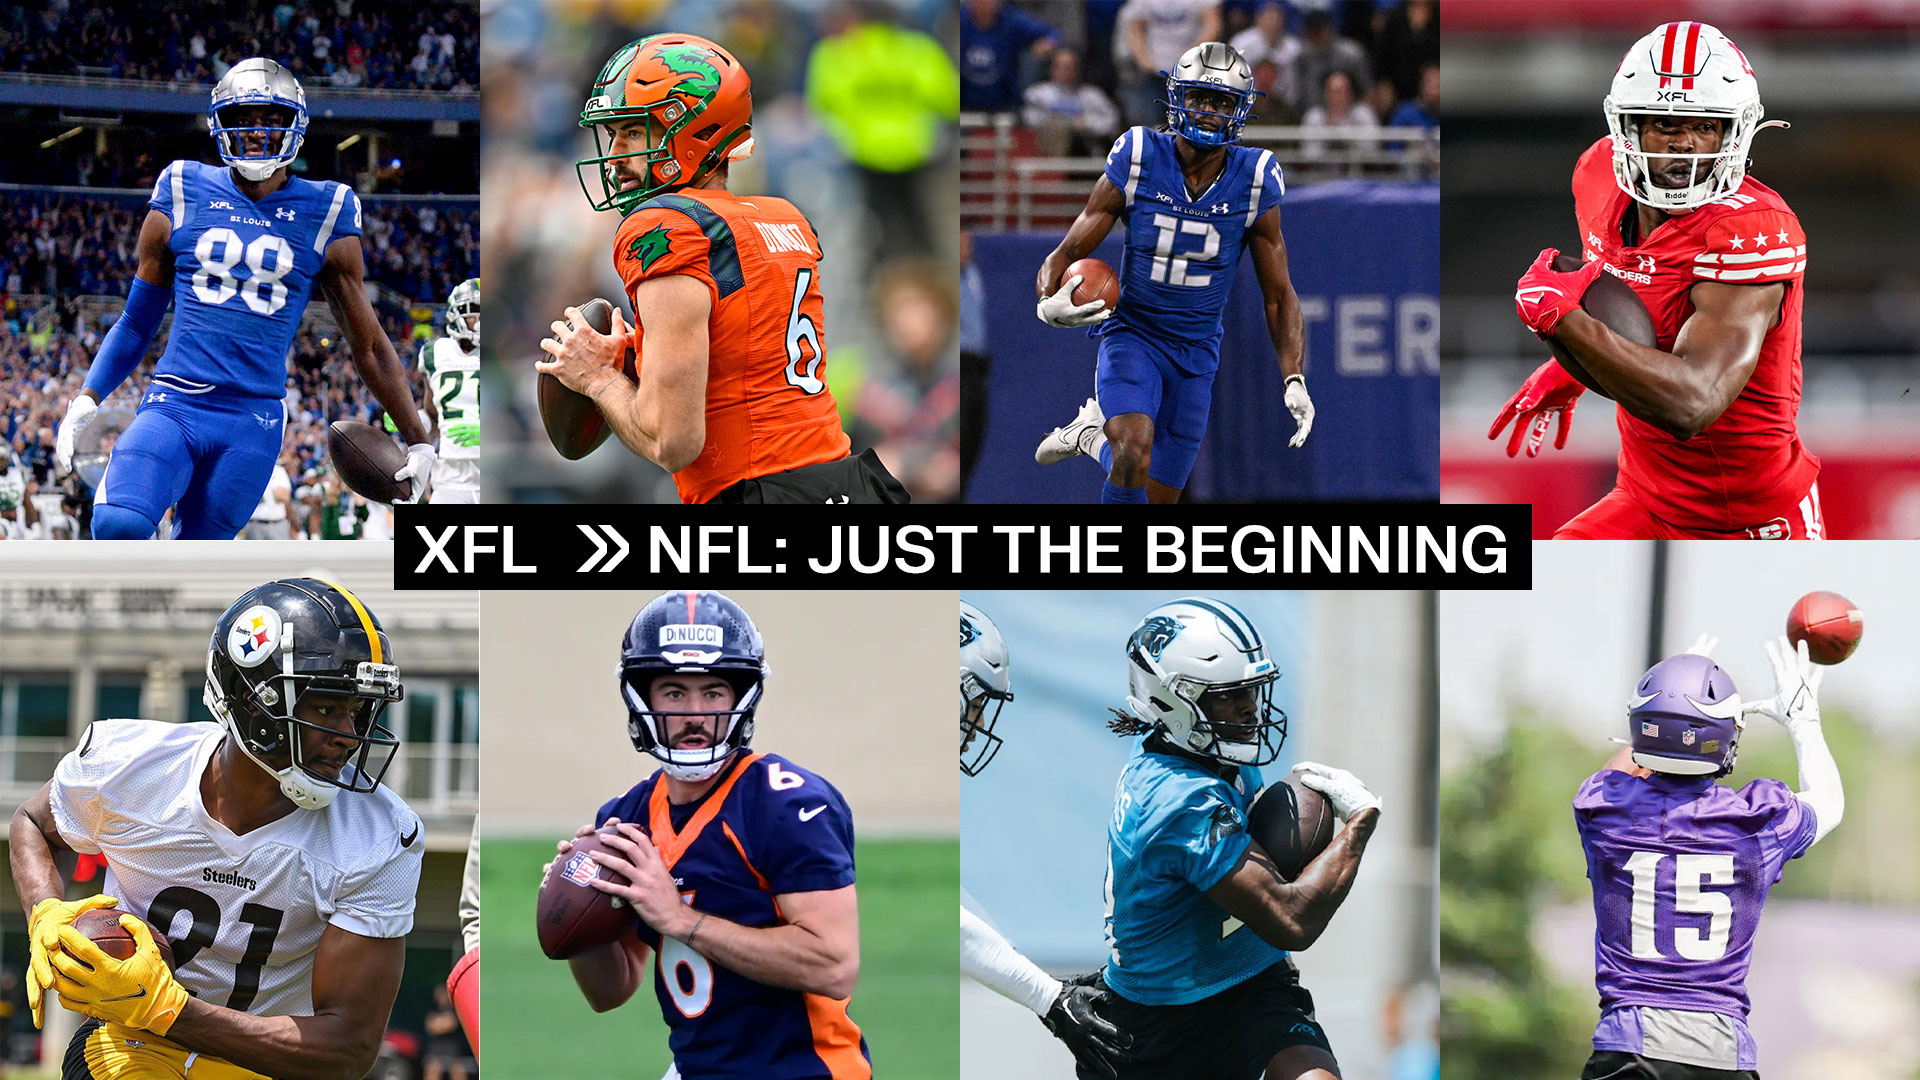 XFL 2020: The 50 Best Players Not Yet Signed to NFL Teams